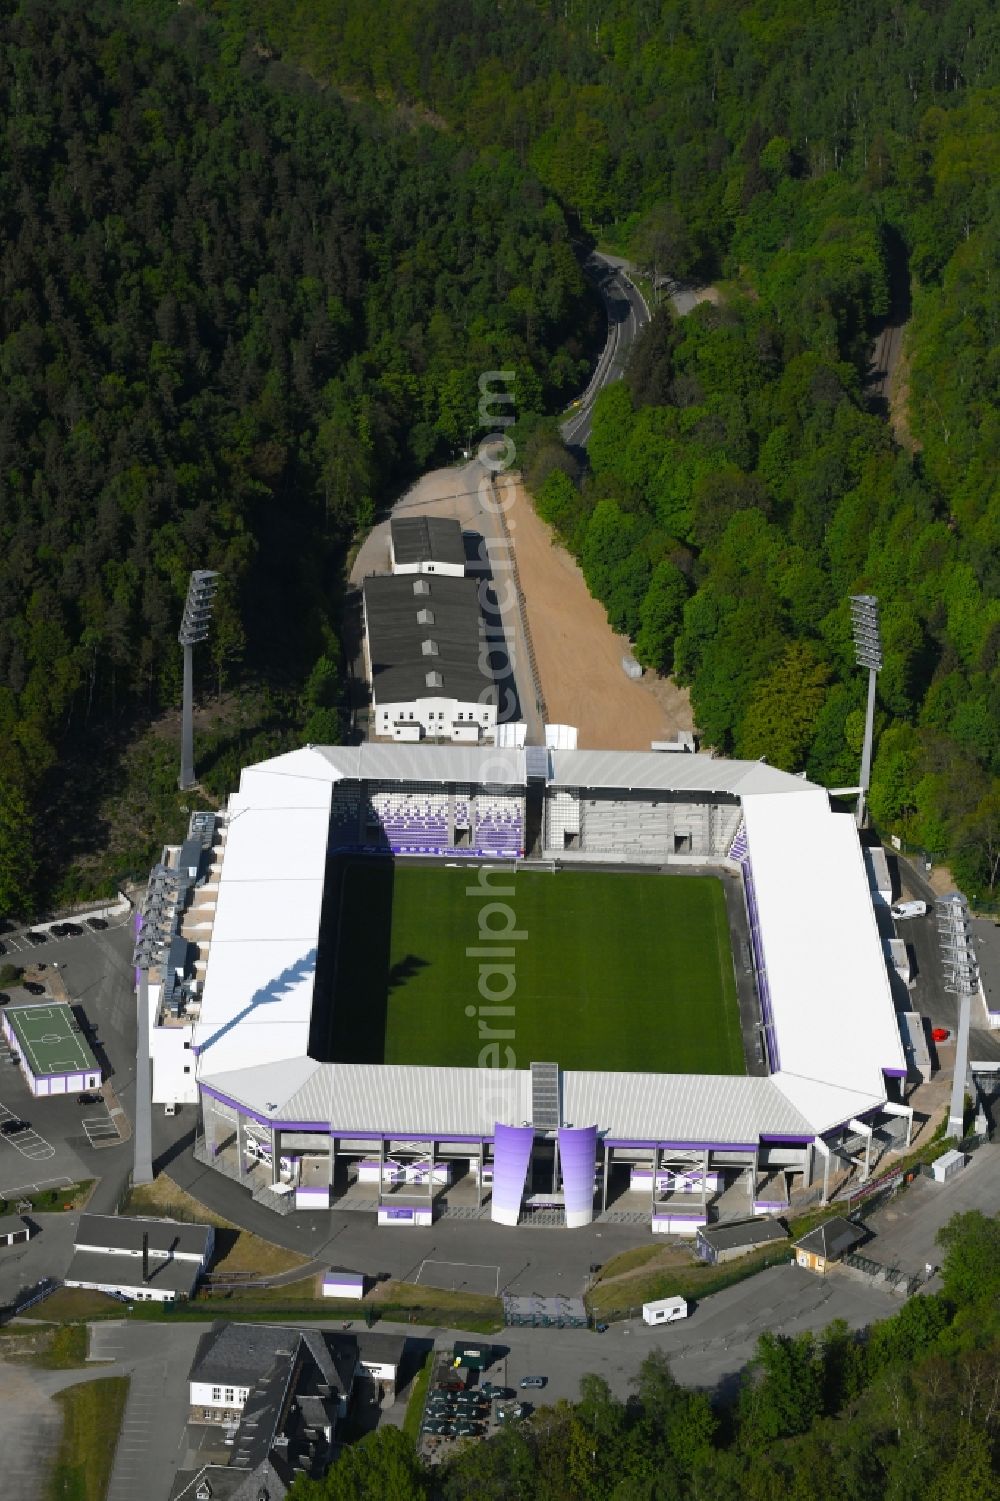 Aue from the bird's eye view: Sports facility grounds of the Arena stadium Erzgebirgsstadion on Loessnitzer Strasse in Aue in the state Saxony, Germany